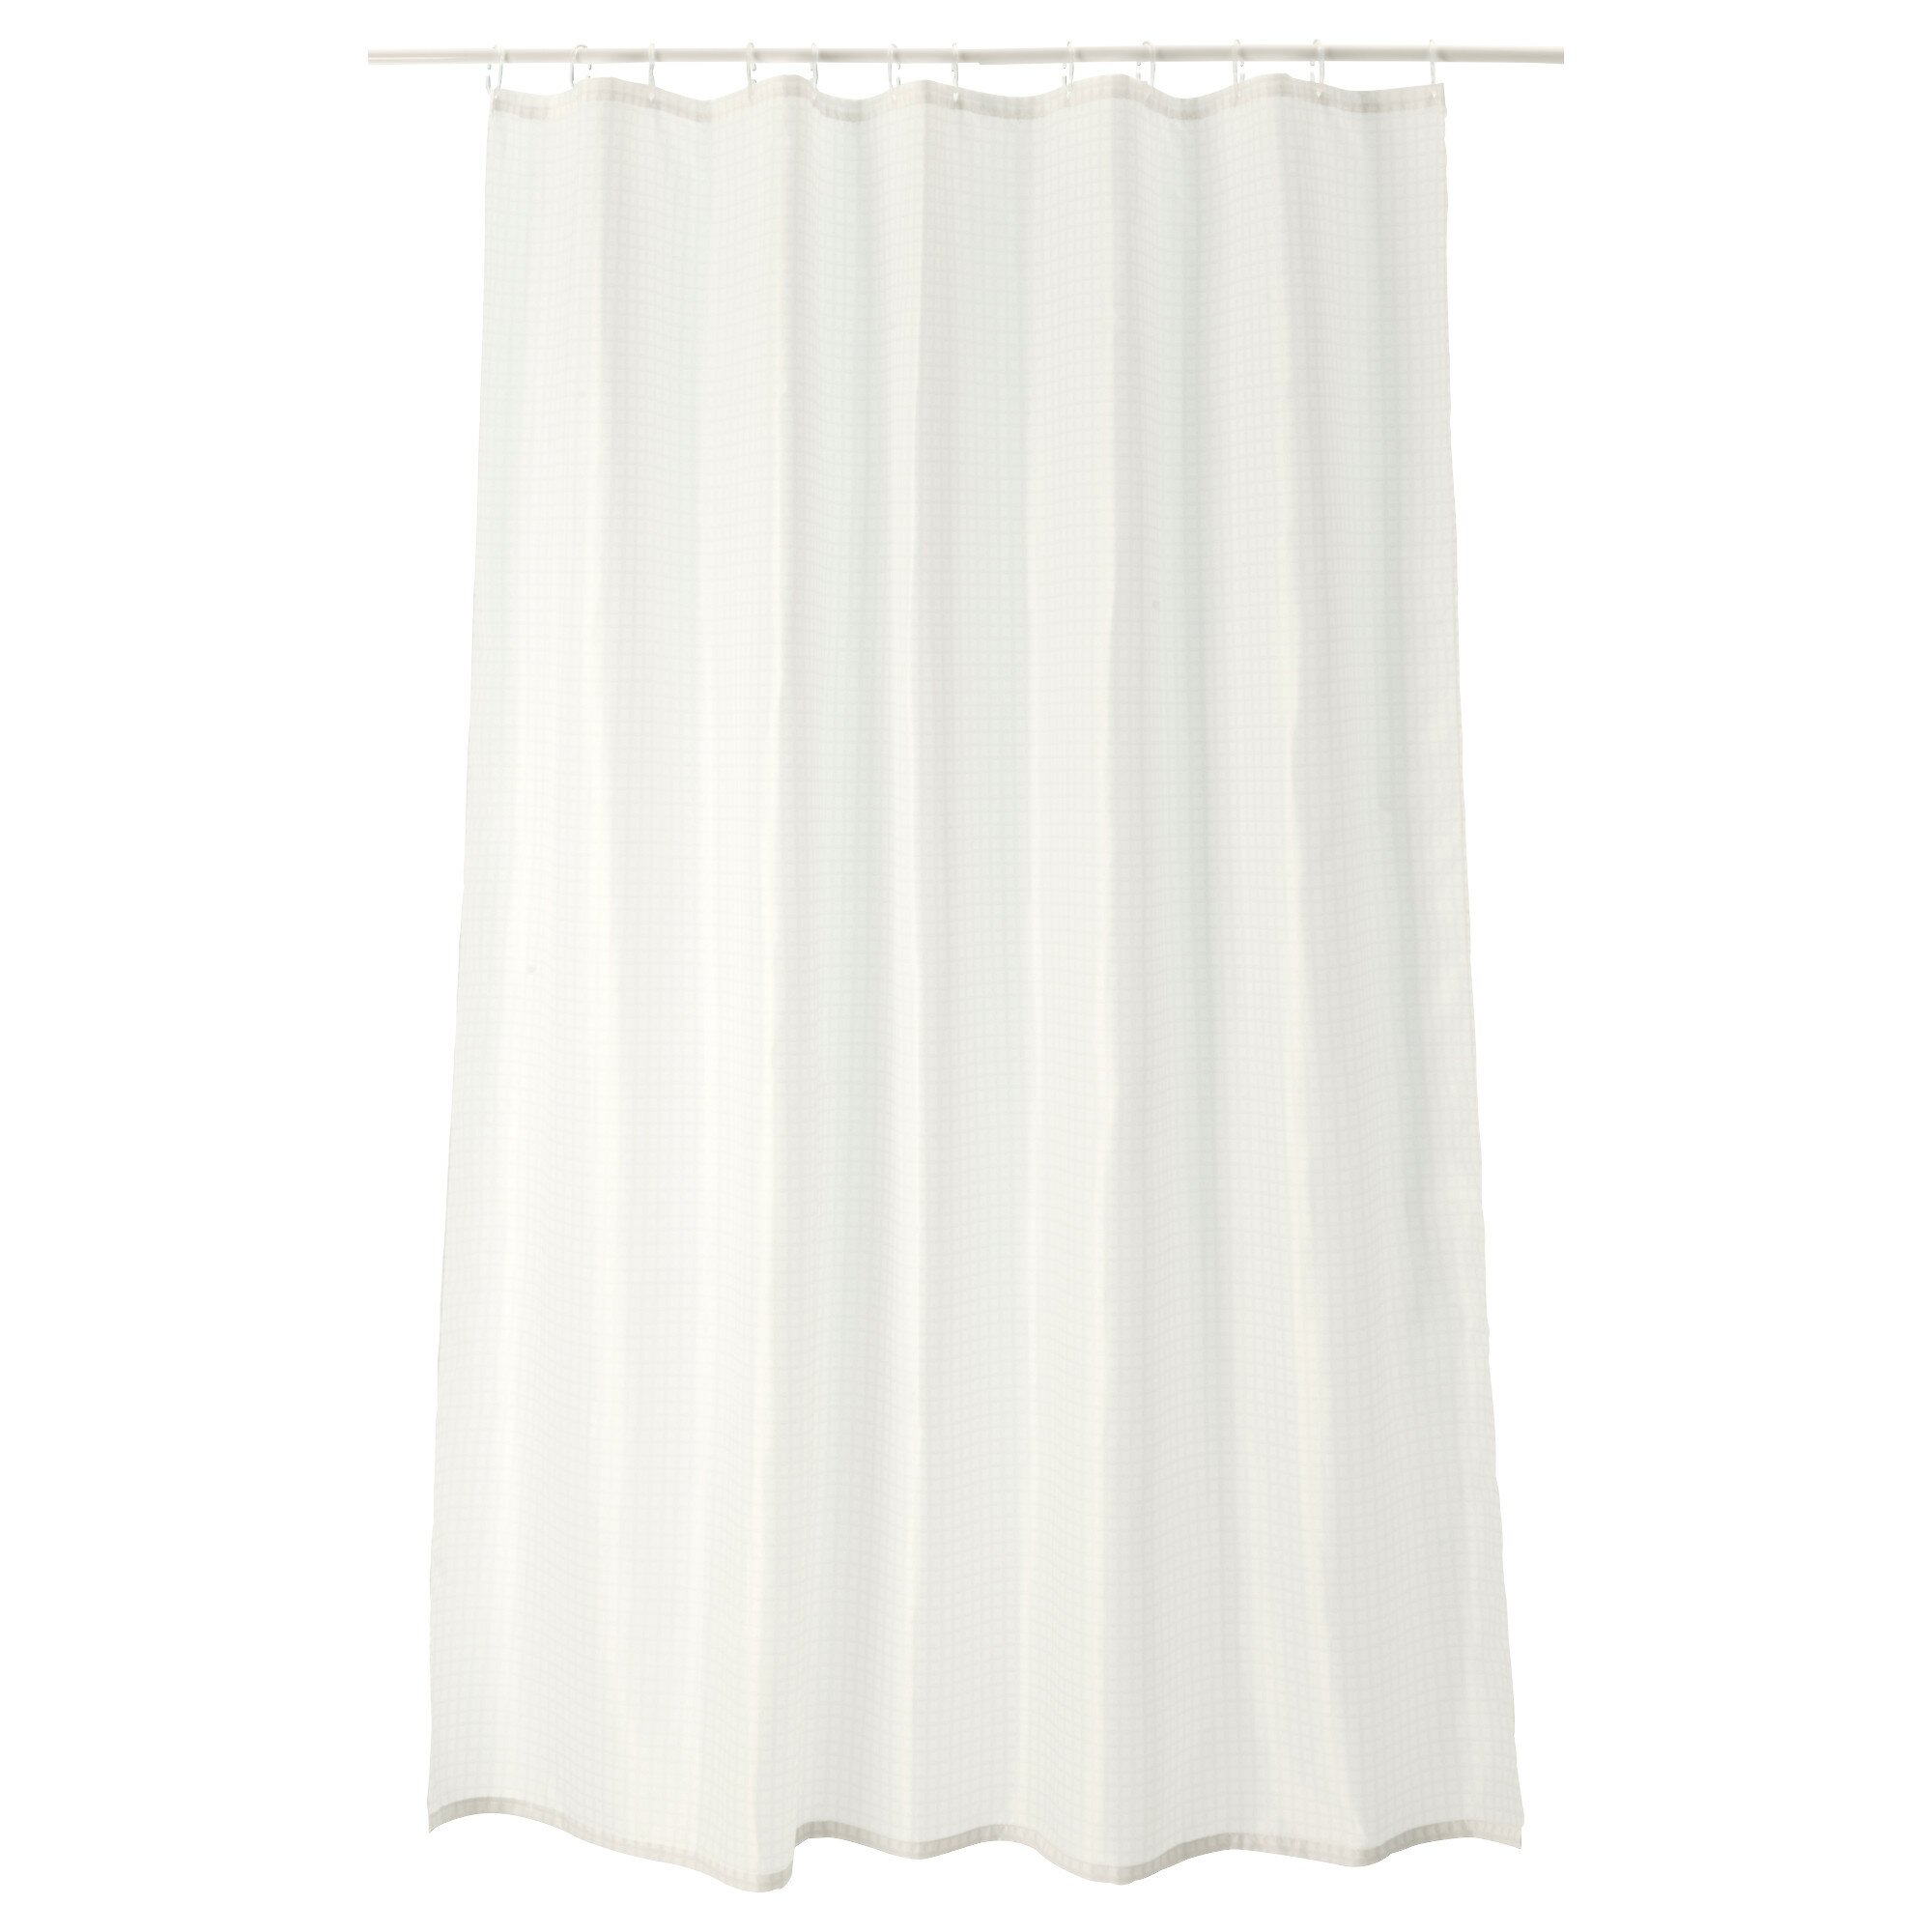 Ikea Shower Curtain for Best Your Bathroom Decoration: Extra Long Shower Curtain Target | Ikea Shower Curtain | See Through Shower Curtains